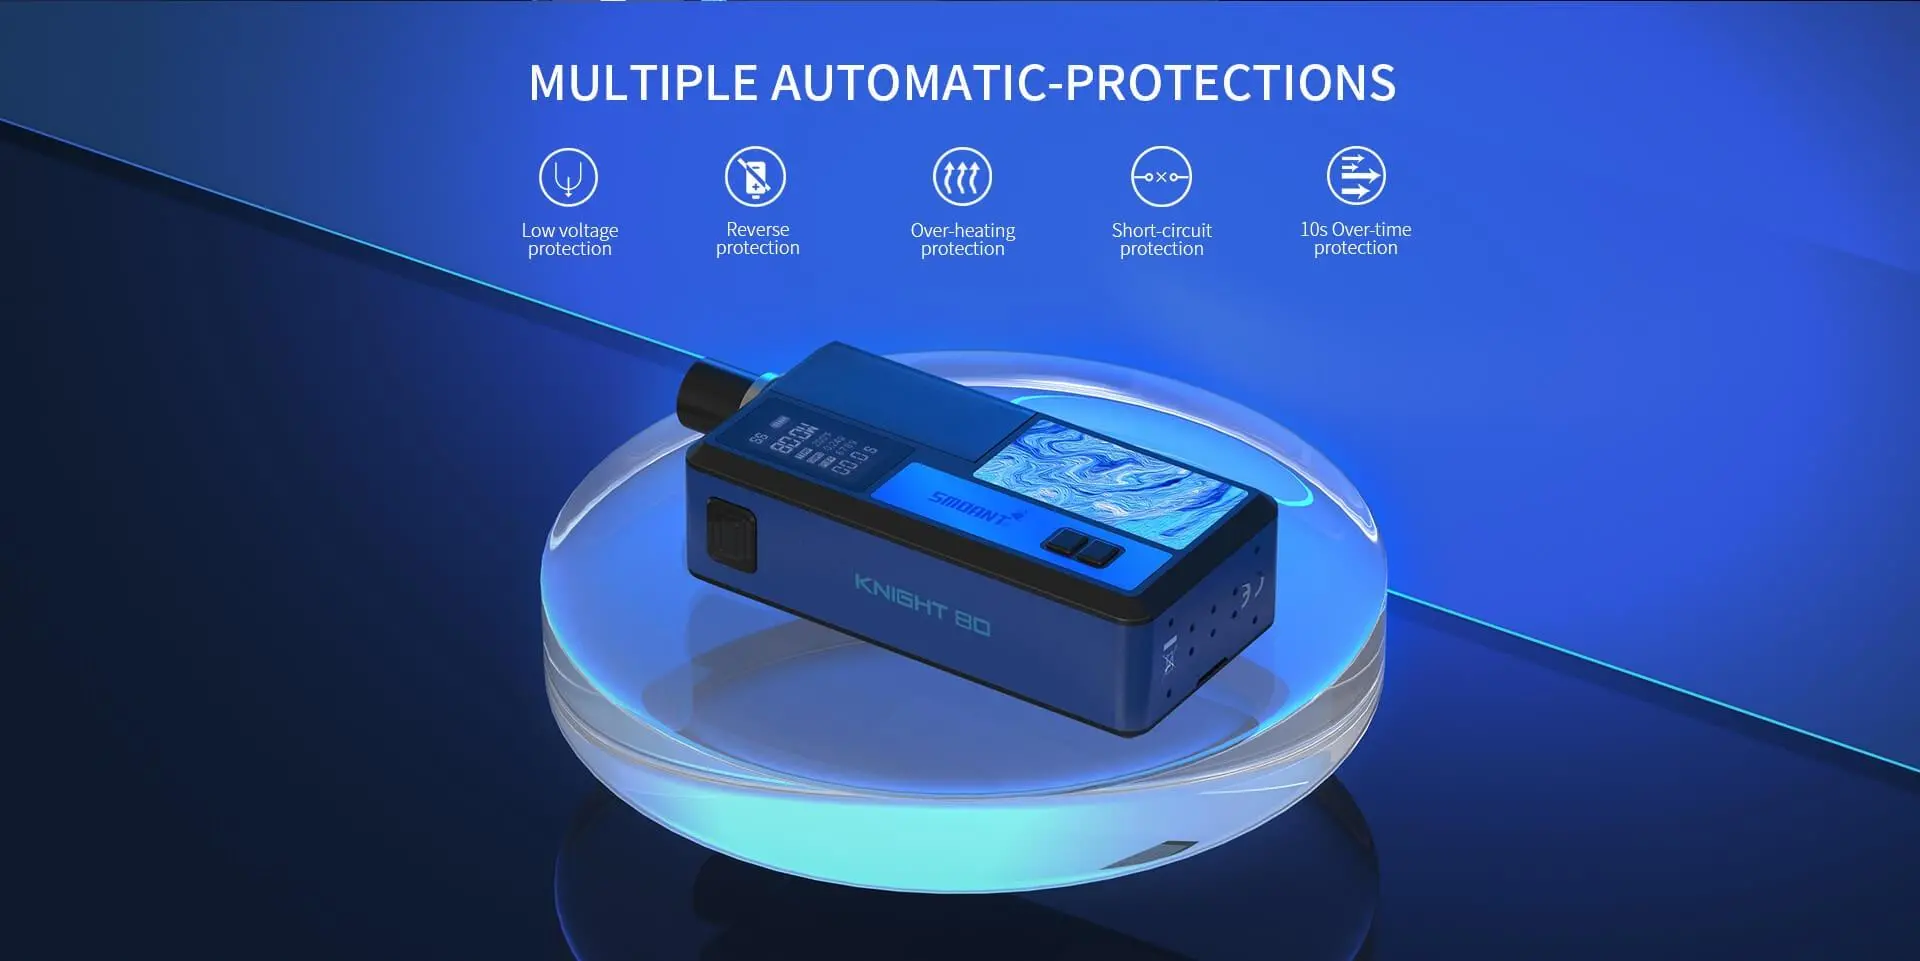 smaont knight 80 MULTIPLE AUTOMATIC-PROTECTIONS